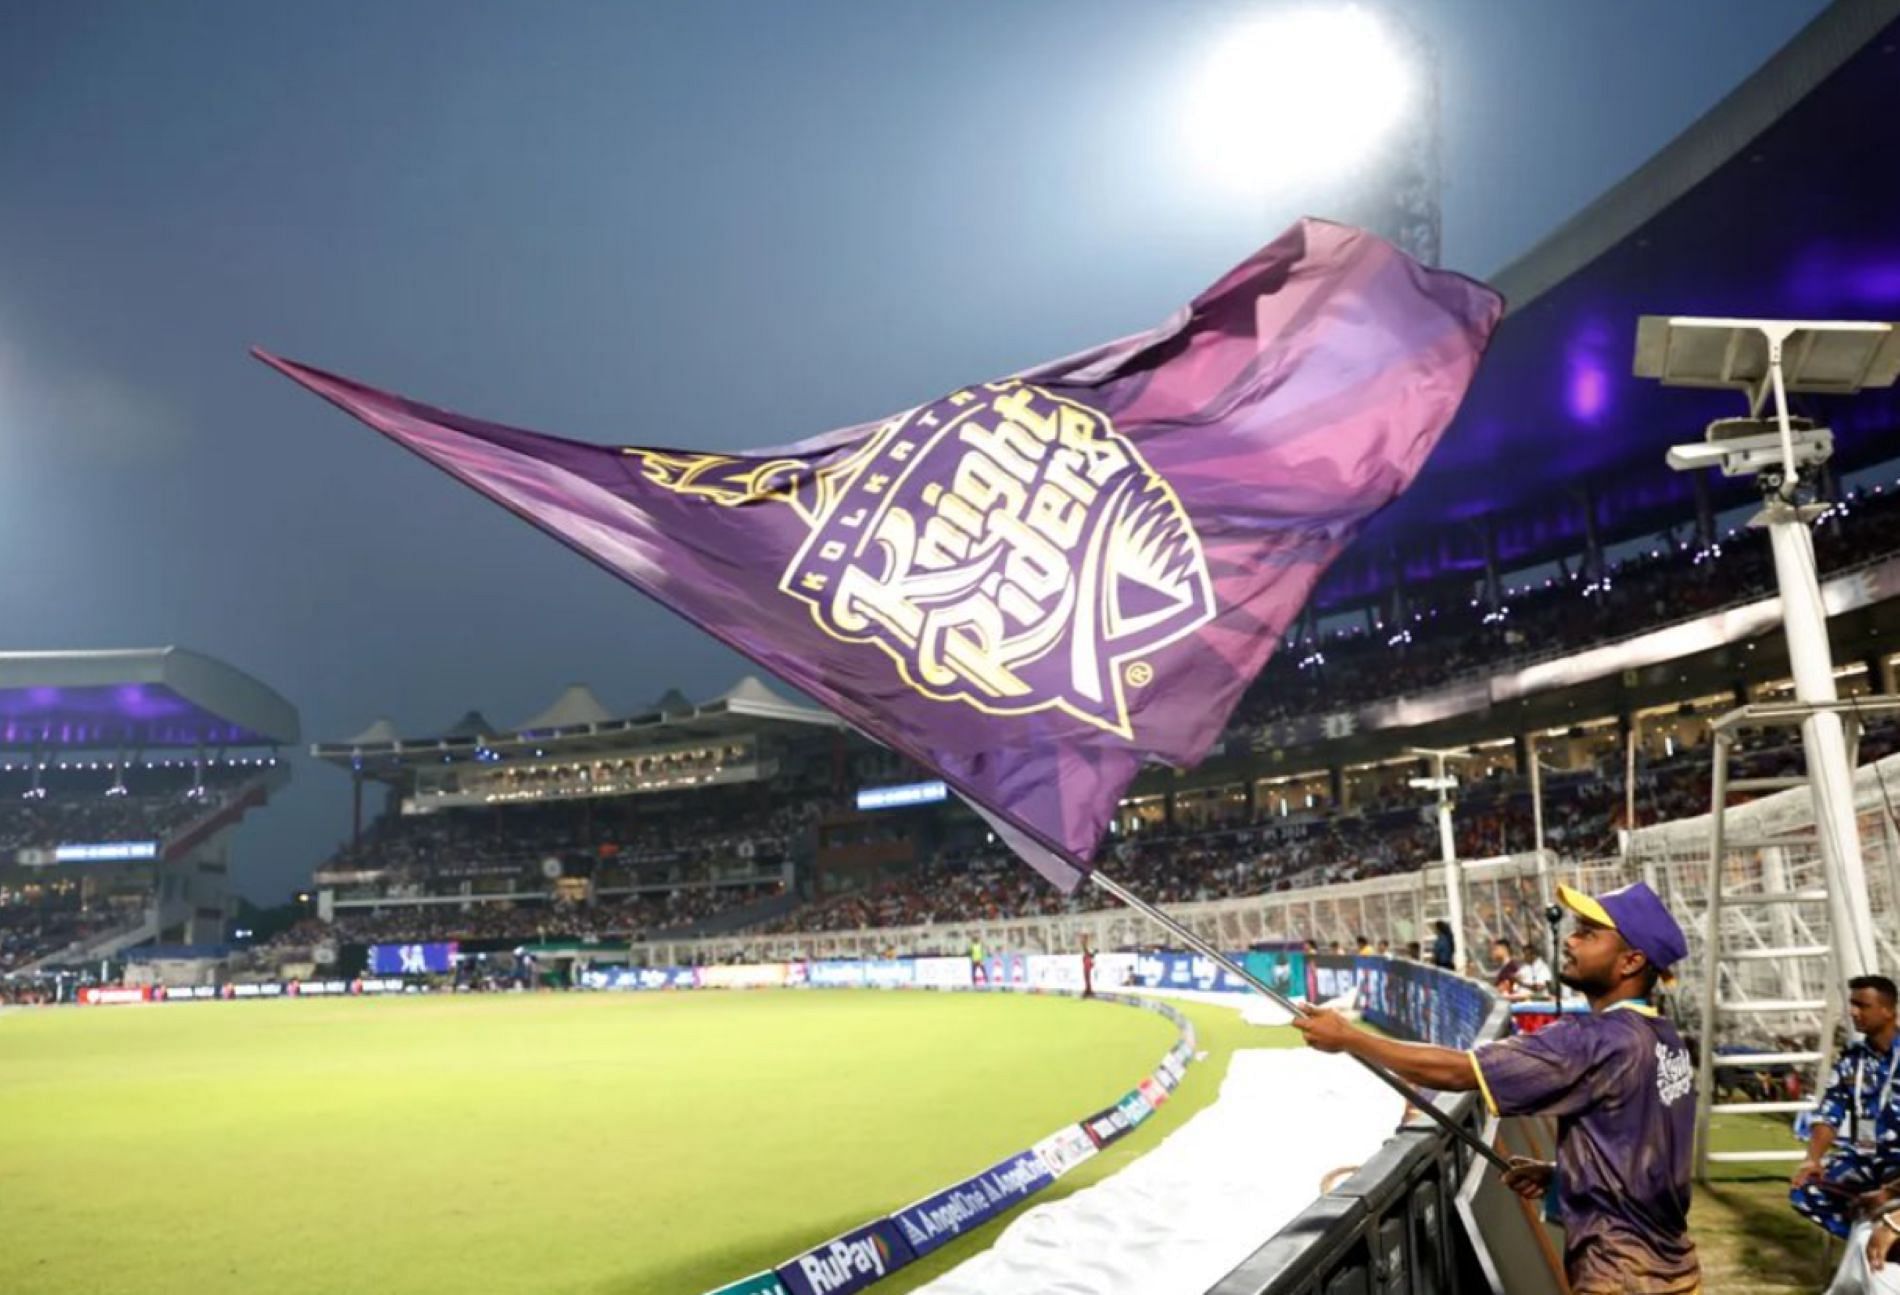 KKR are on their way to making the Eden Gardens their fortress [Credit: Shreyas Iyer Twitter handle]